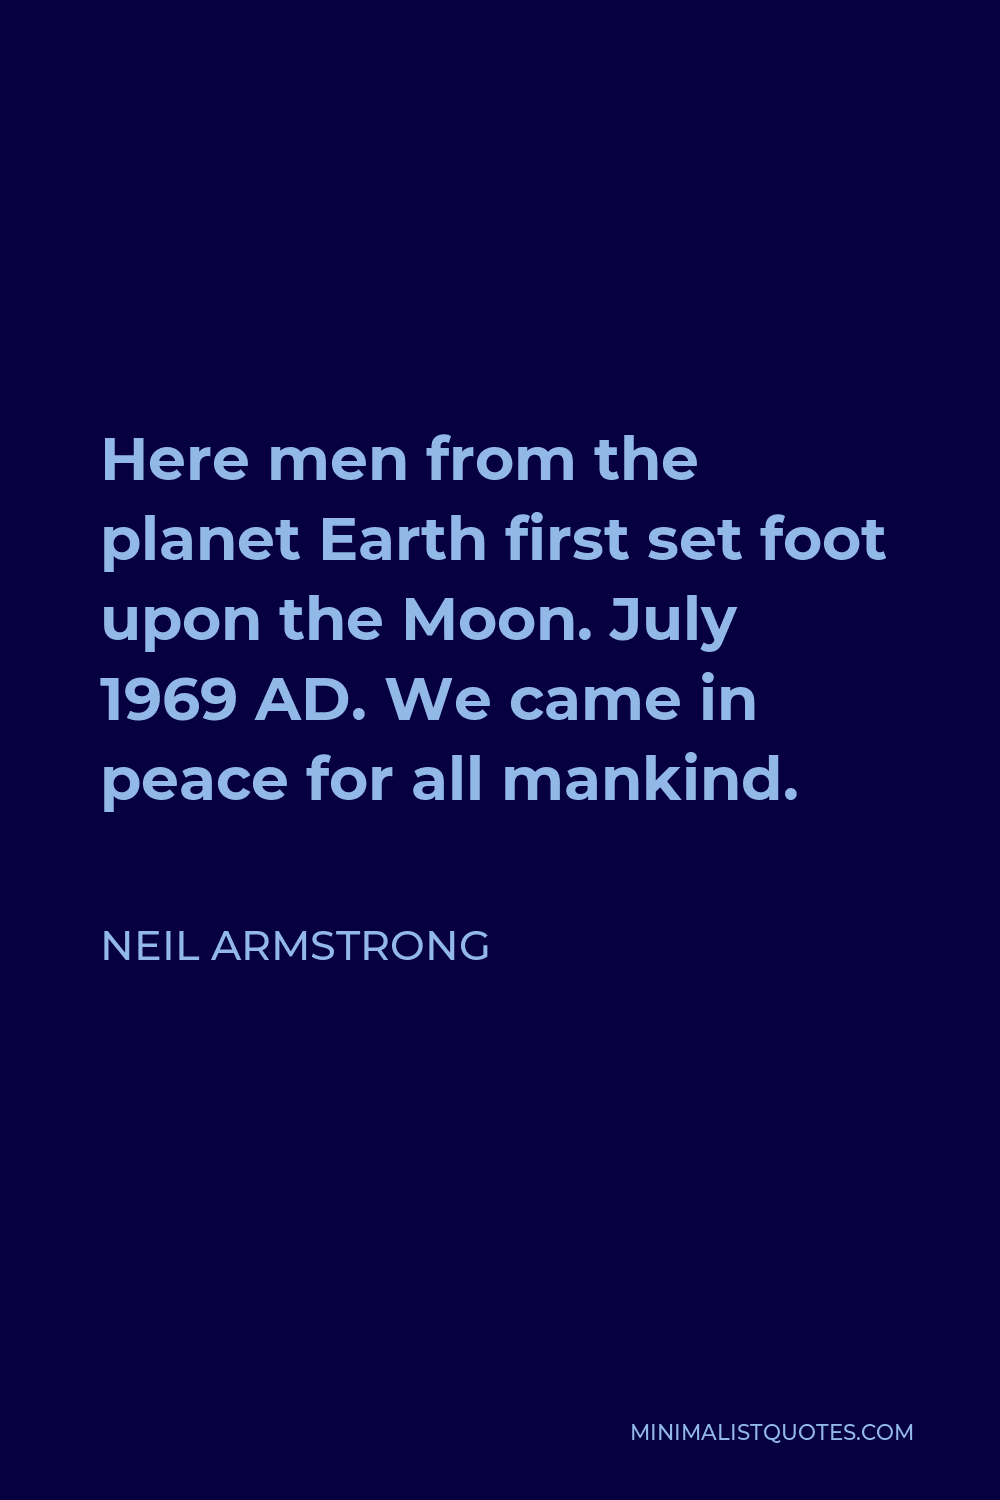 Neil Armstrong Quote - Here men from the planet Earth first set foot upon the Moon. July 1969 AD. We came in peace for all mankind.